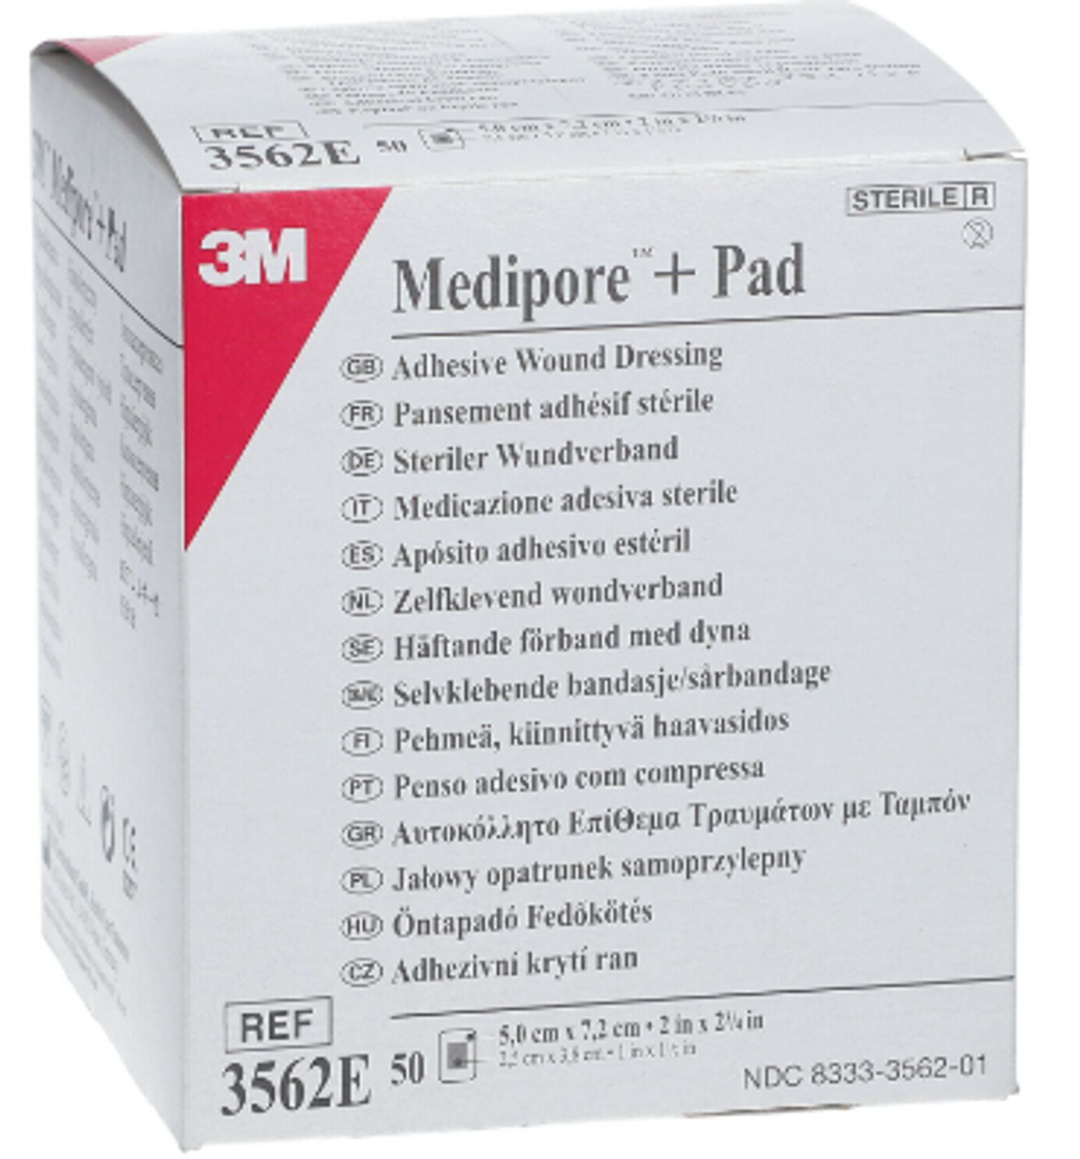 3M Medipore + Pad Wound Dressing - 5cm x 7cm Pack of 50 (3562E)